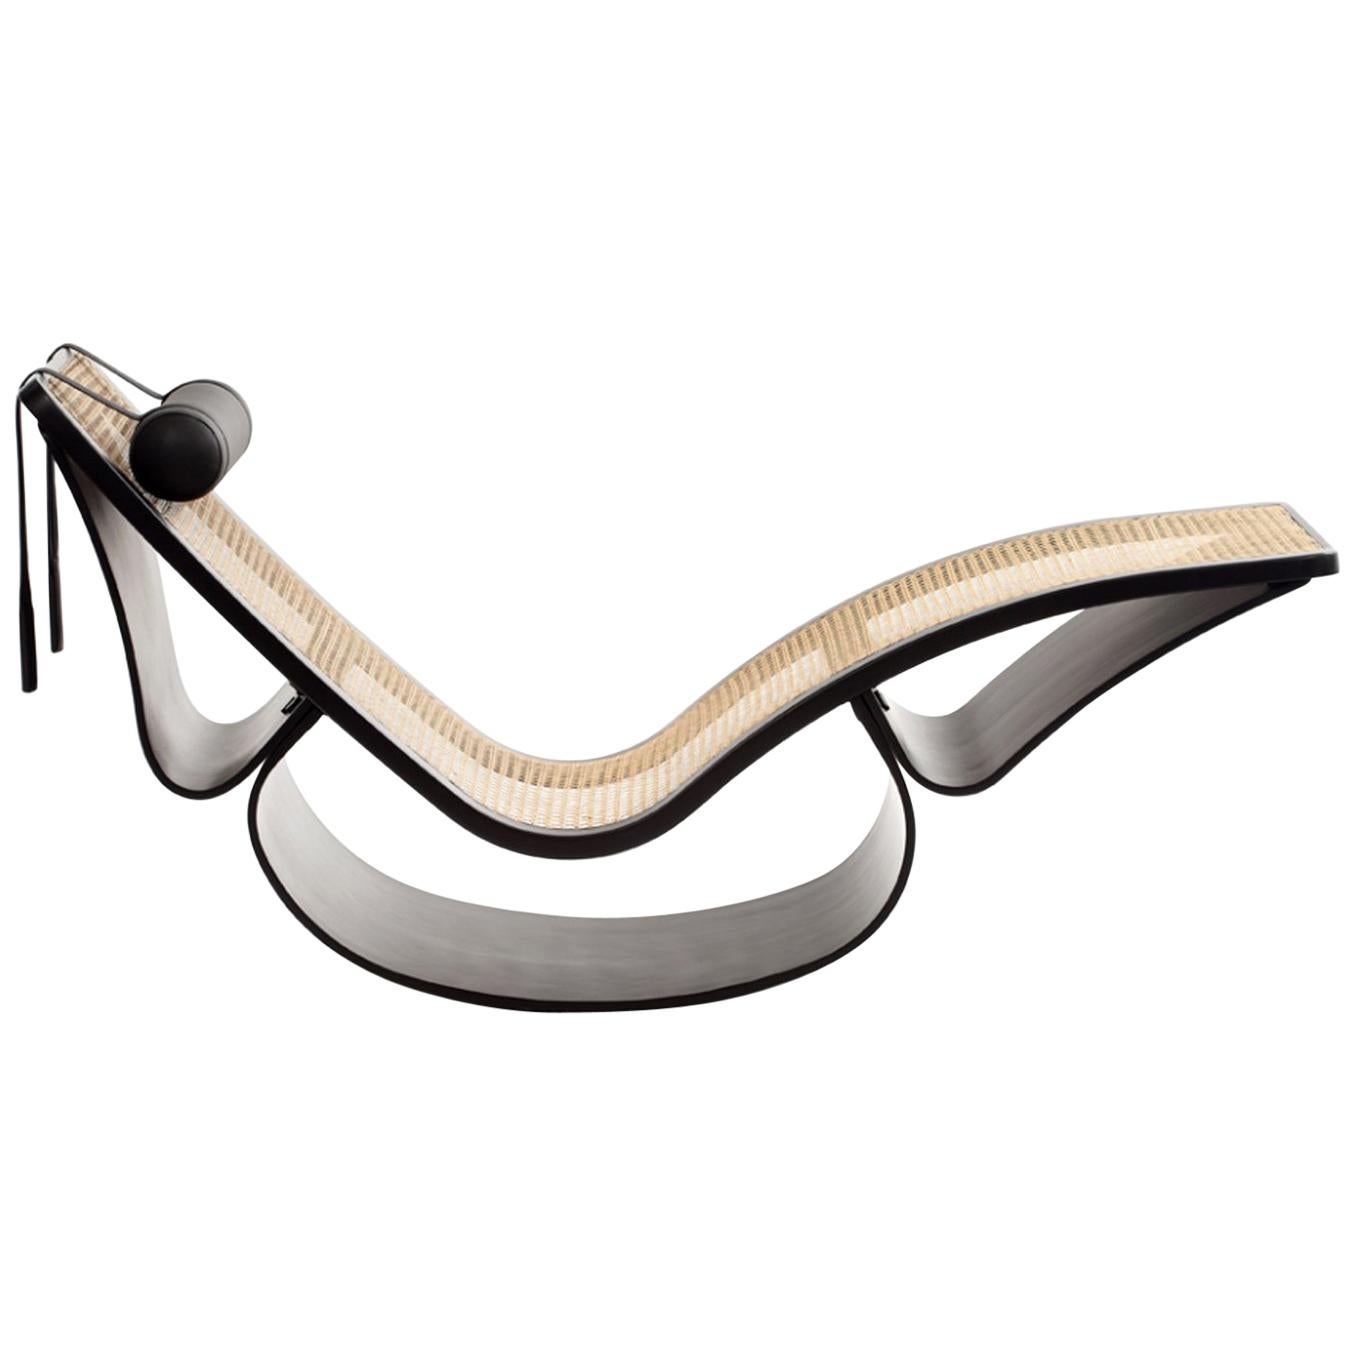 Oscar Niemeyer Modern Rio Chaise Lounge, Contemporary Re-Edition by Etel For Sale